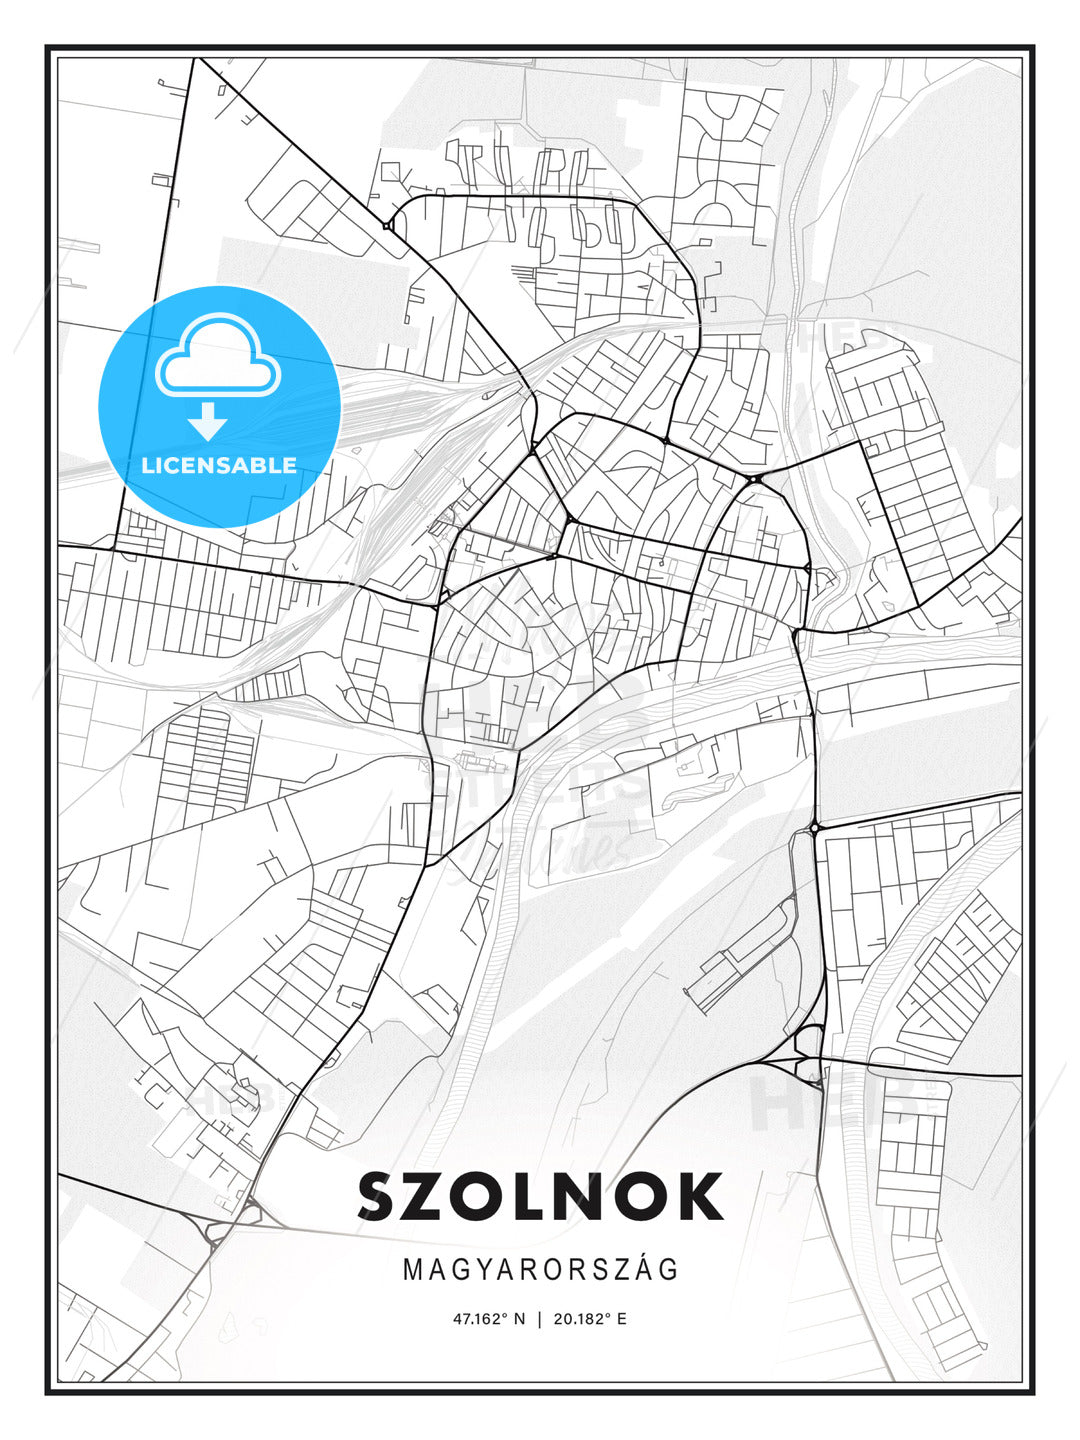 Szolnok, Hungary, Modern Print Template in Various Formats - HEBSTREITS Sketches